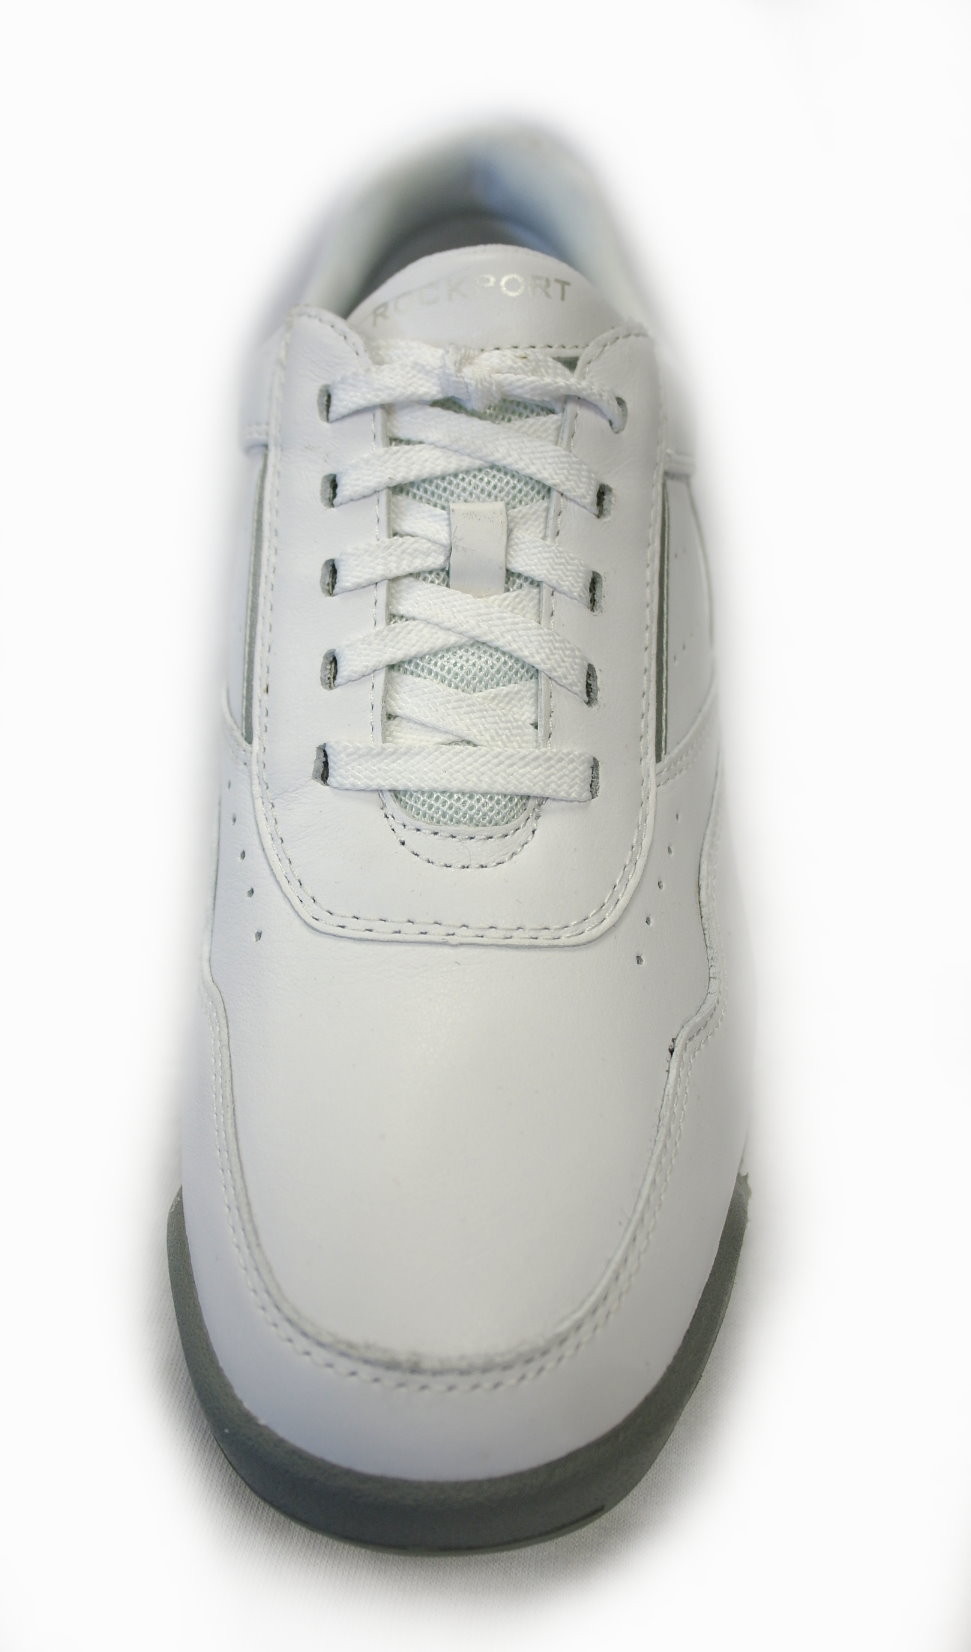 Rockport Shoe / Color: White Griffin - SCOTTEEZ URBAN